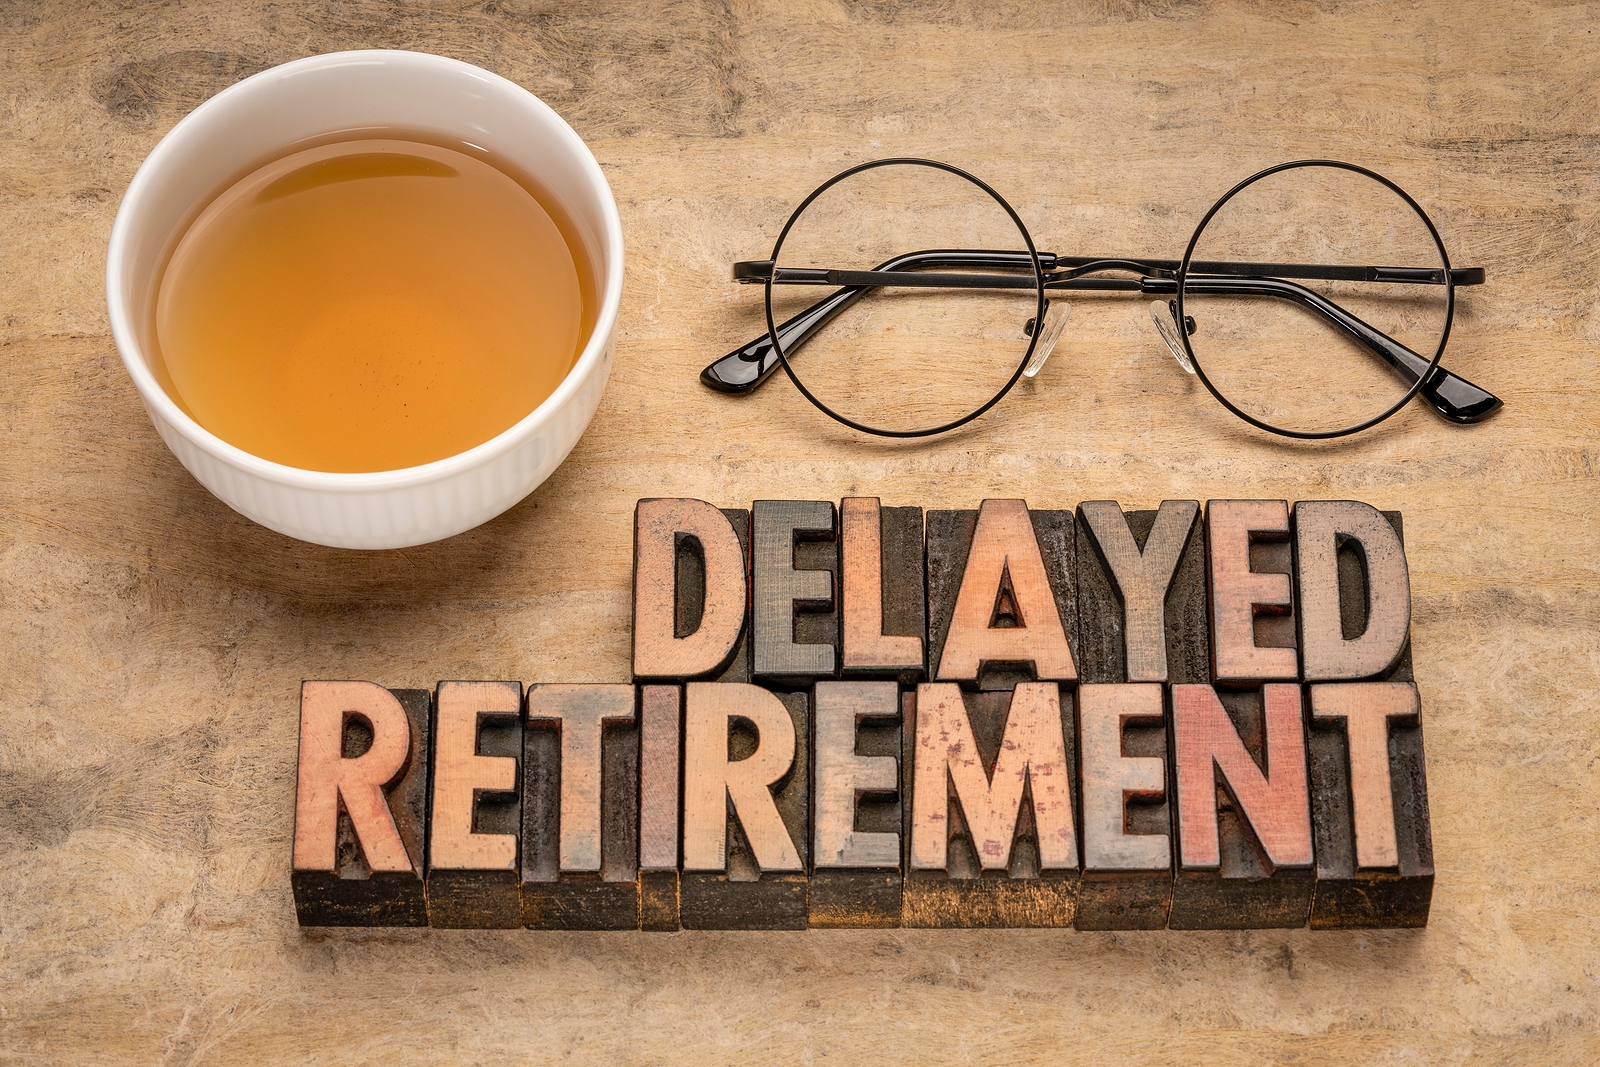 Thinking About Delaying Retirement? Here’s What To Consider